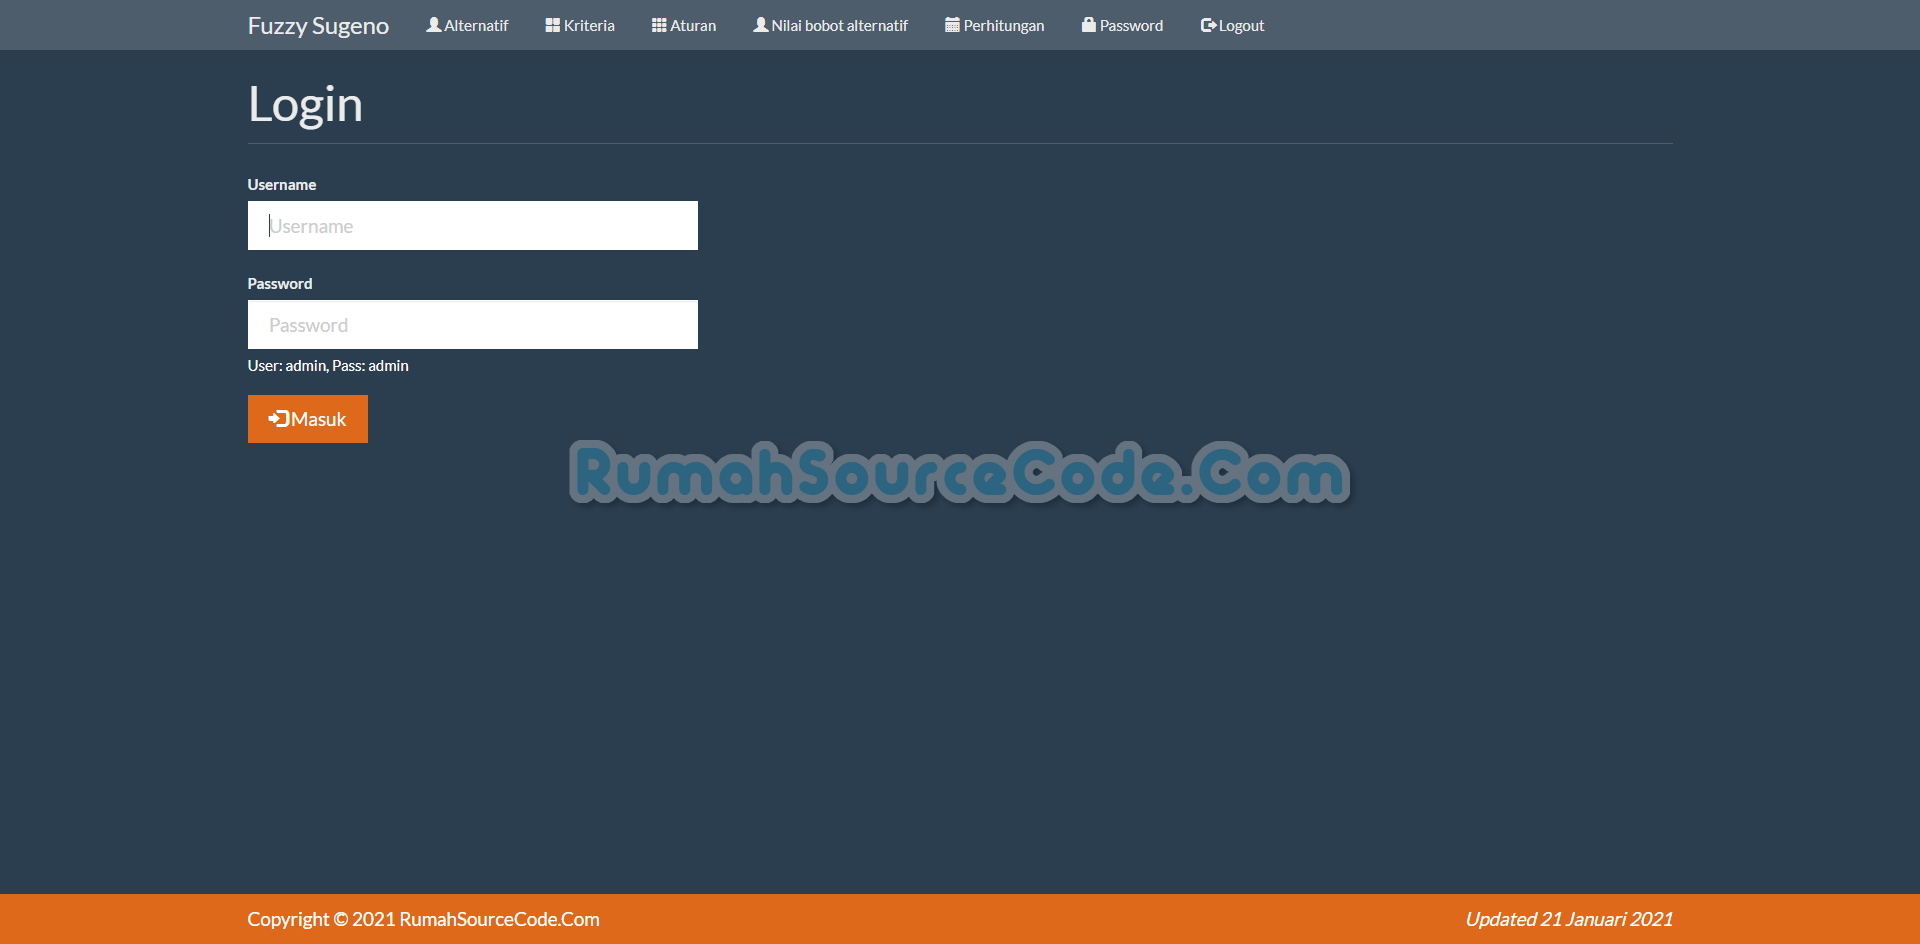 Source Code Fuzzy Sugeno PHP Login